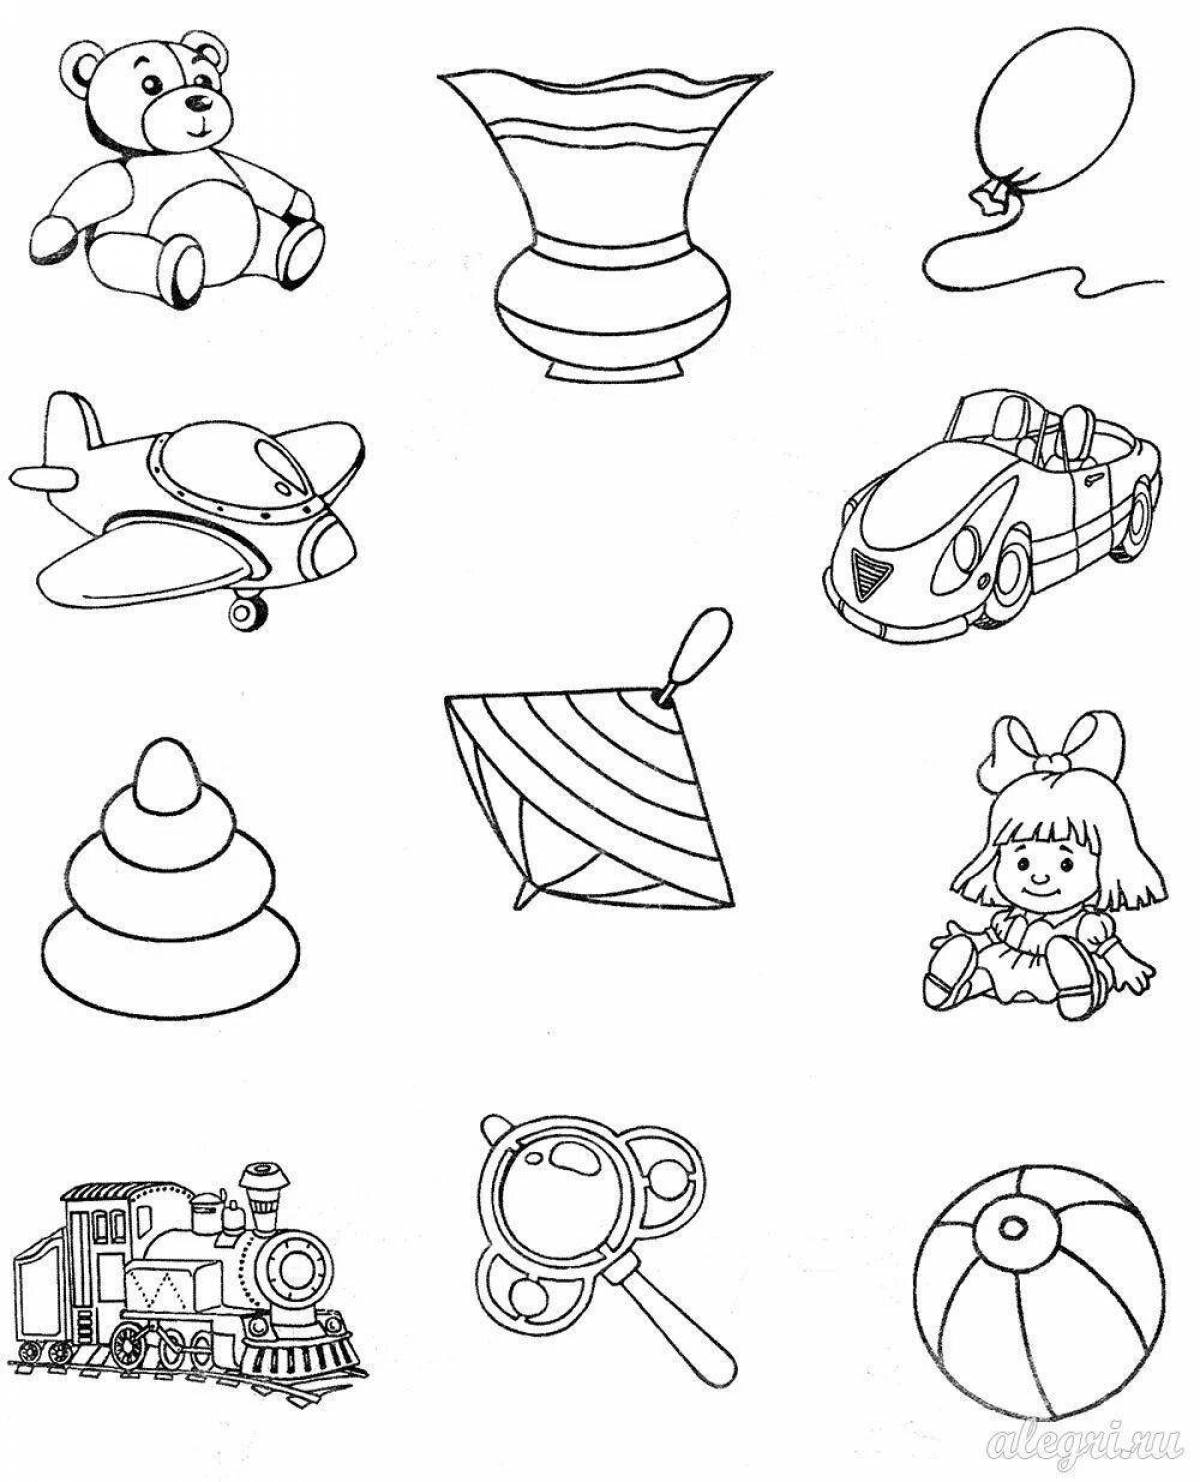 Colourful coloring pages for little imaginative